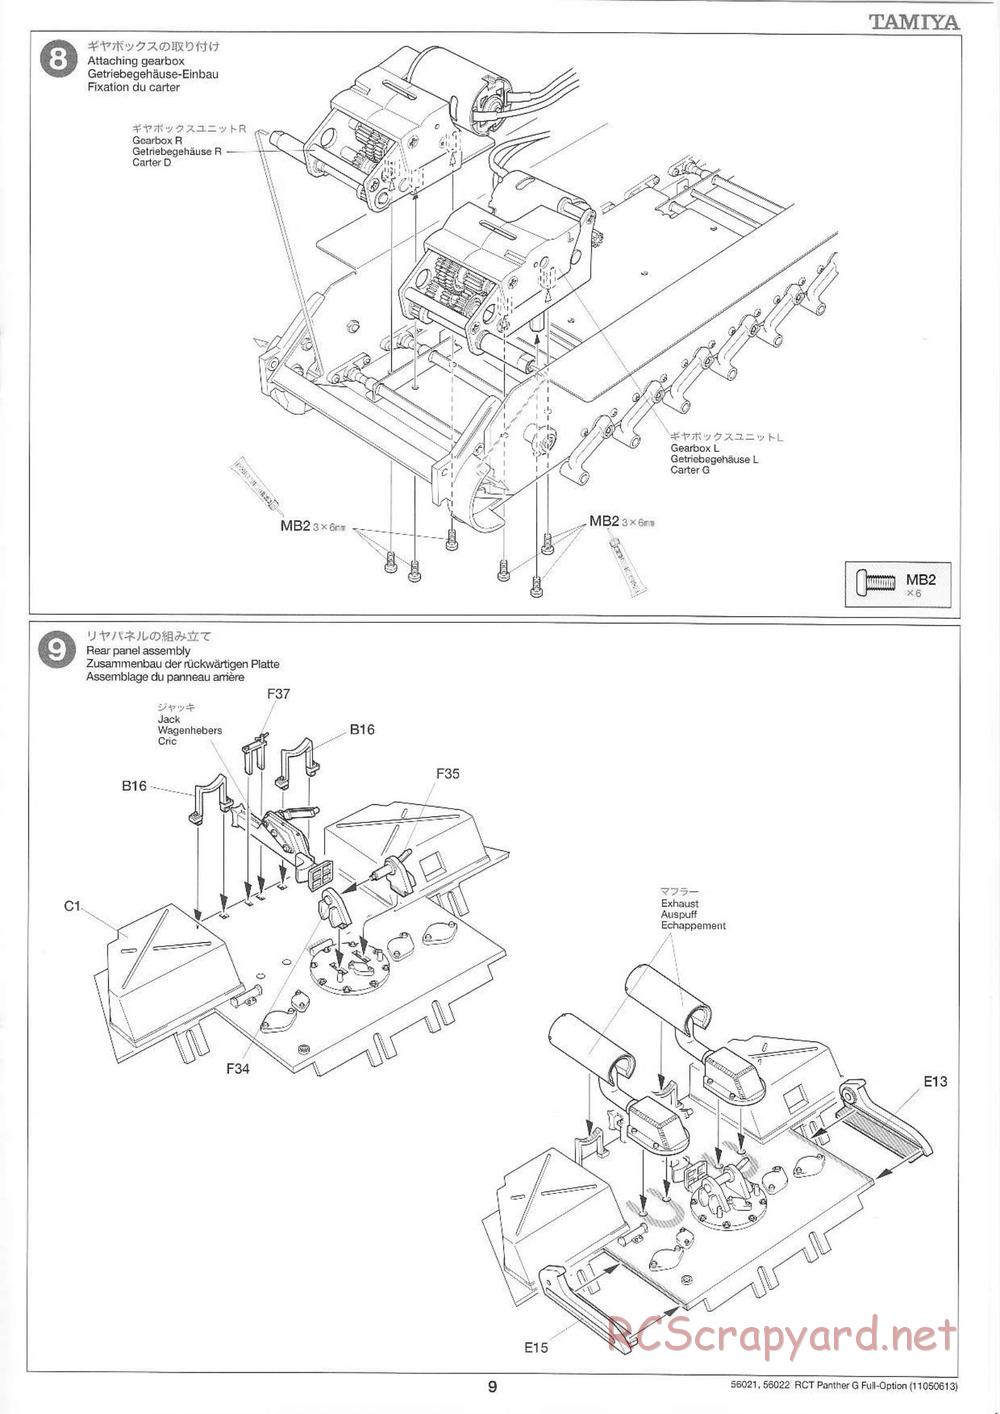 Tamiya - Panther Type G - 1/16 Scale Chassis - Manual - Page 9